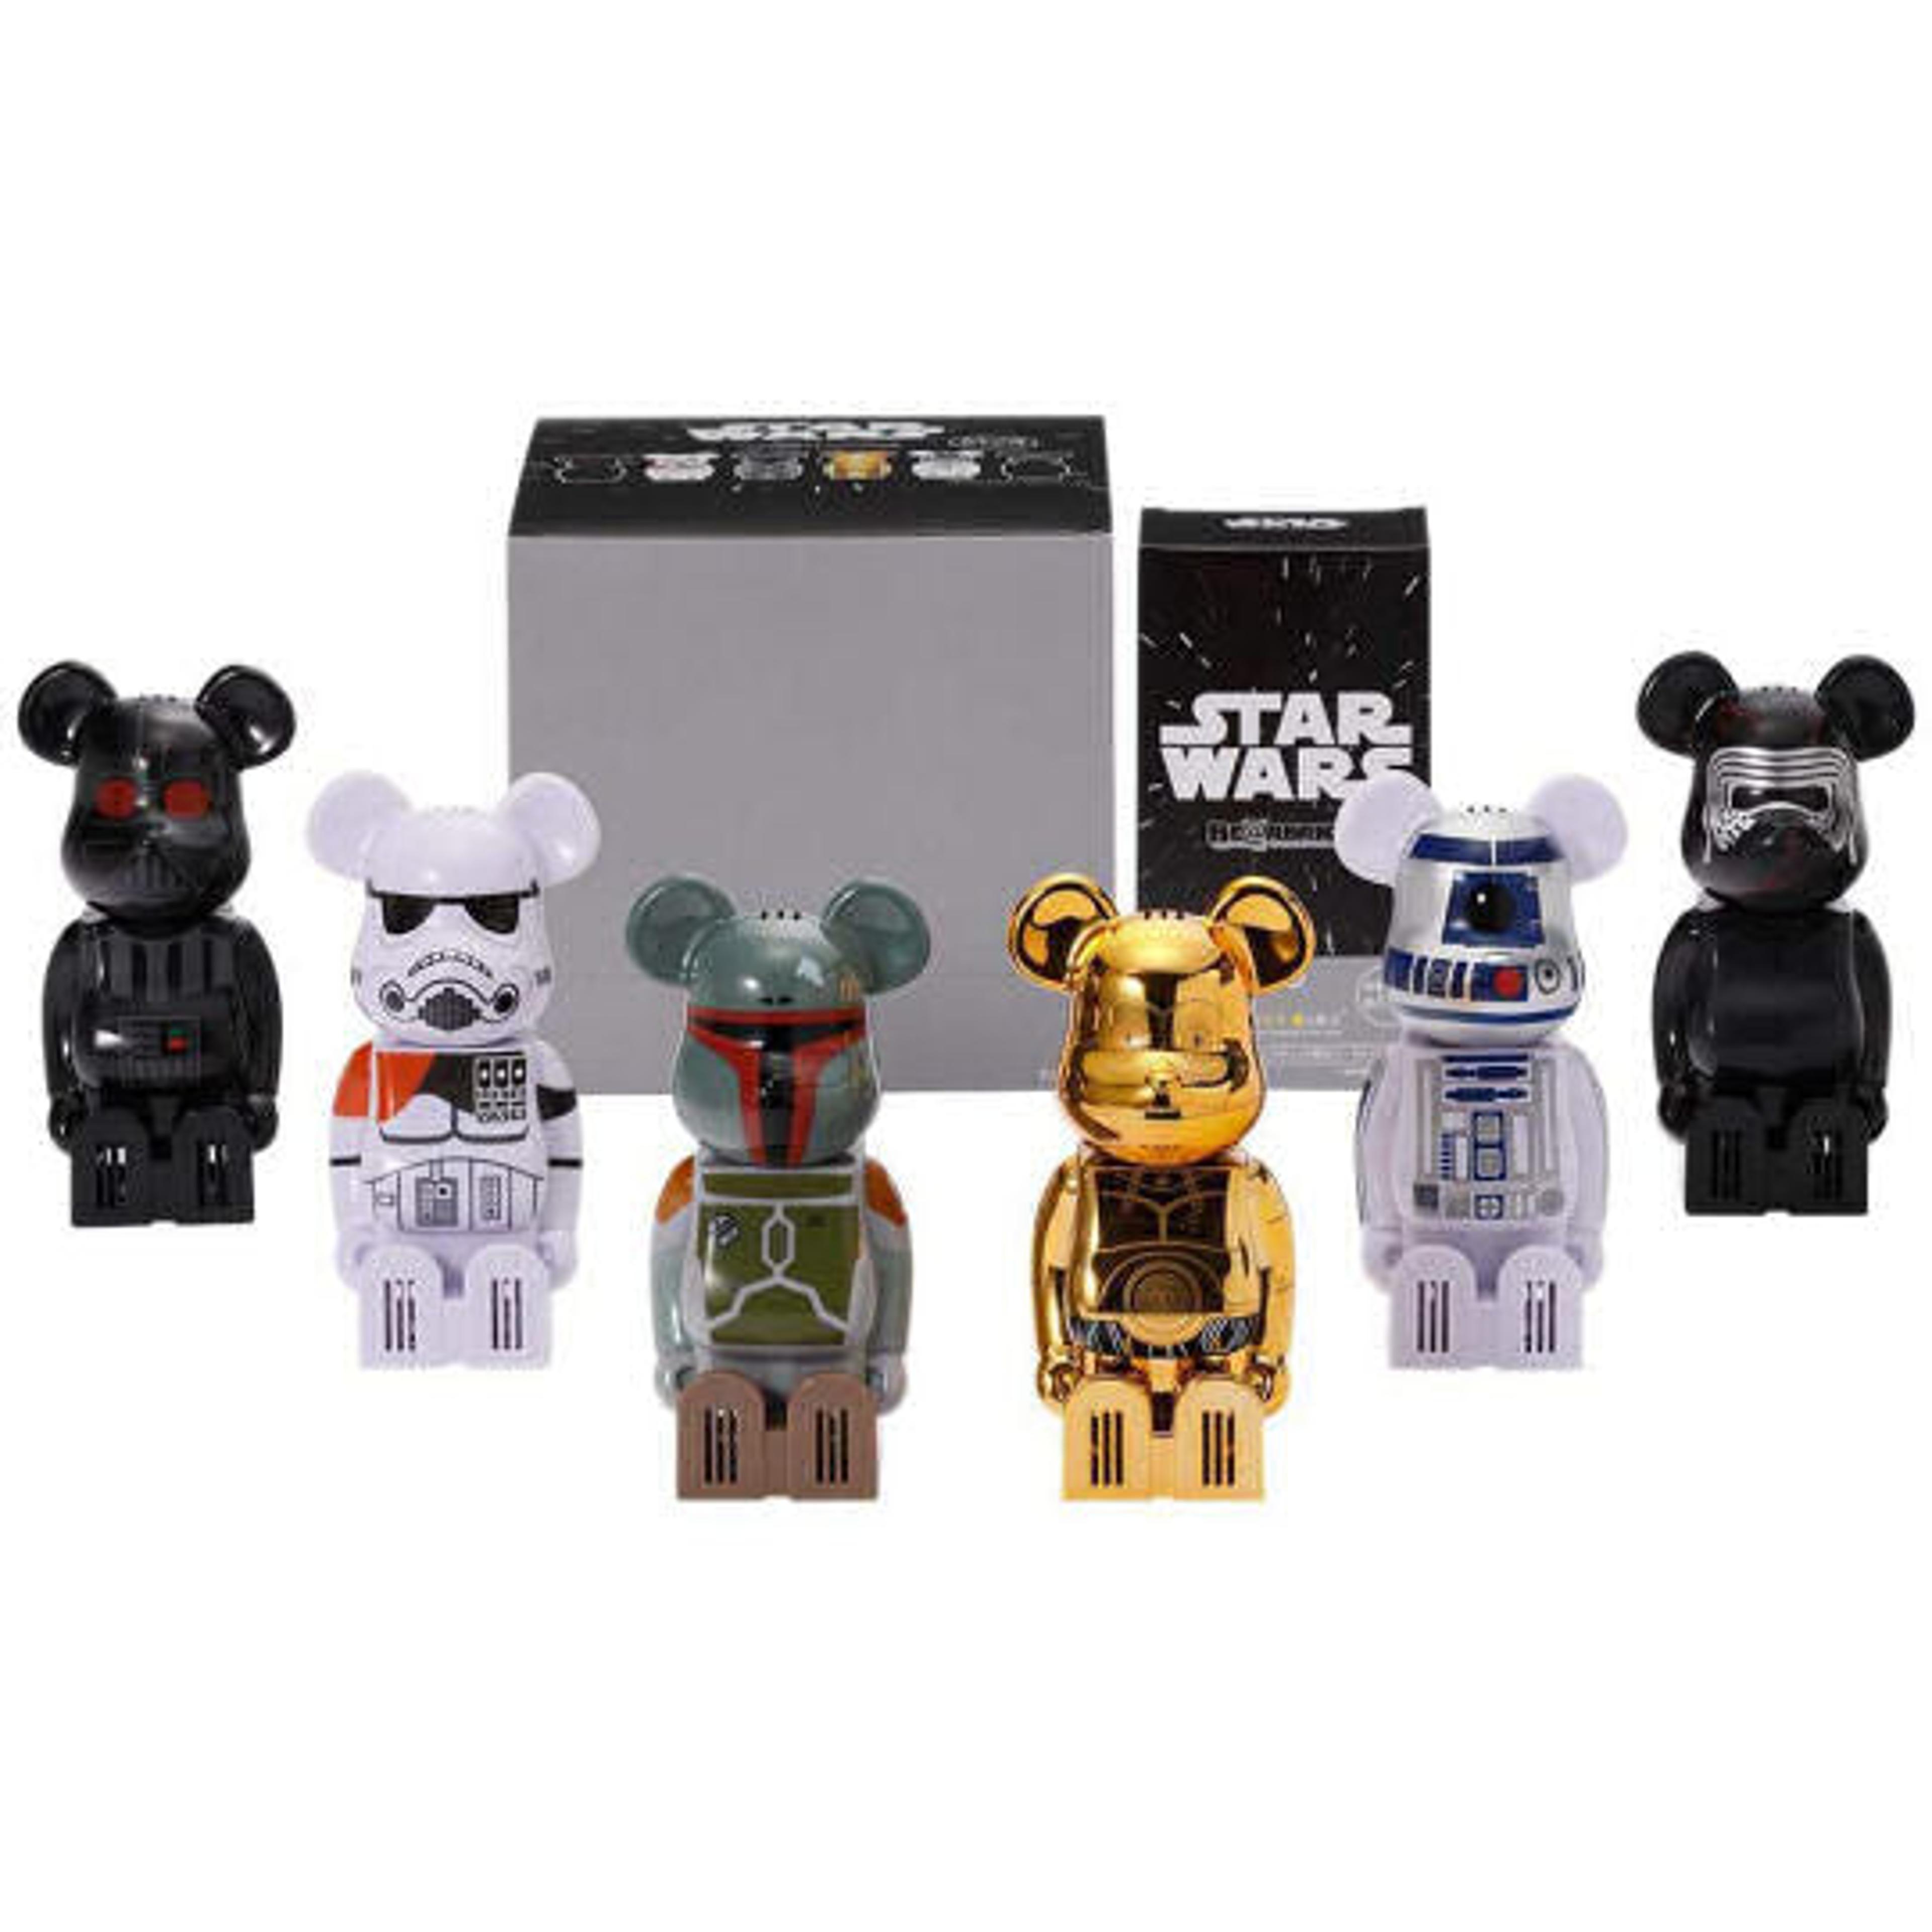 Alternate View 7 of Medicom Toy BE＠RBRICK Cleverin Star Wars 6 Piece Compete Set L